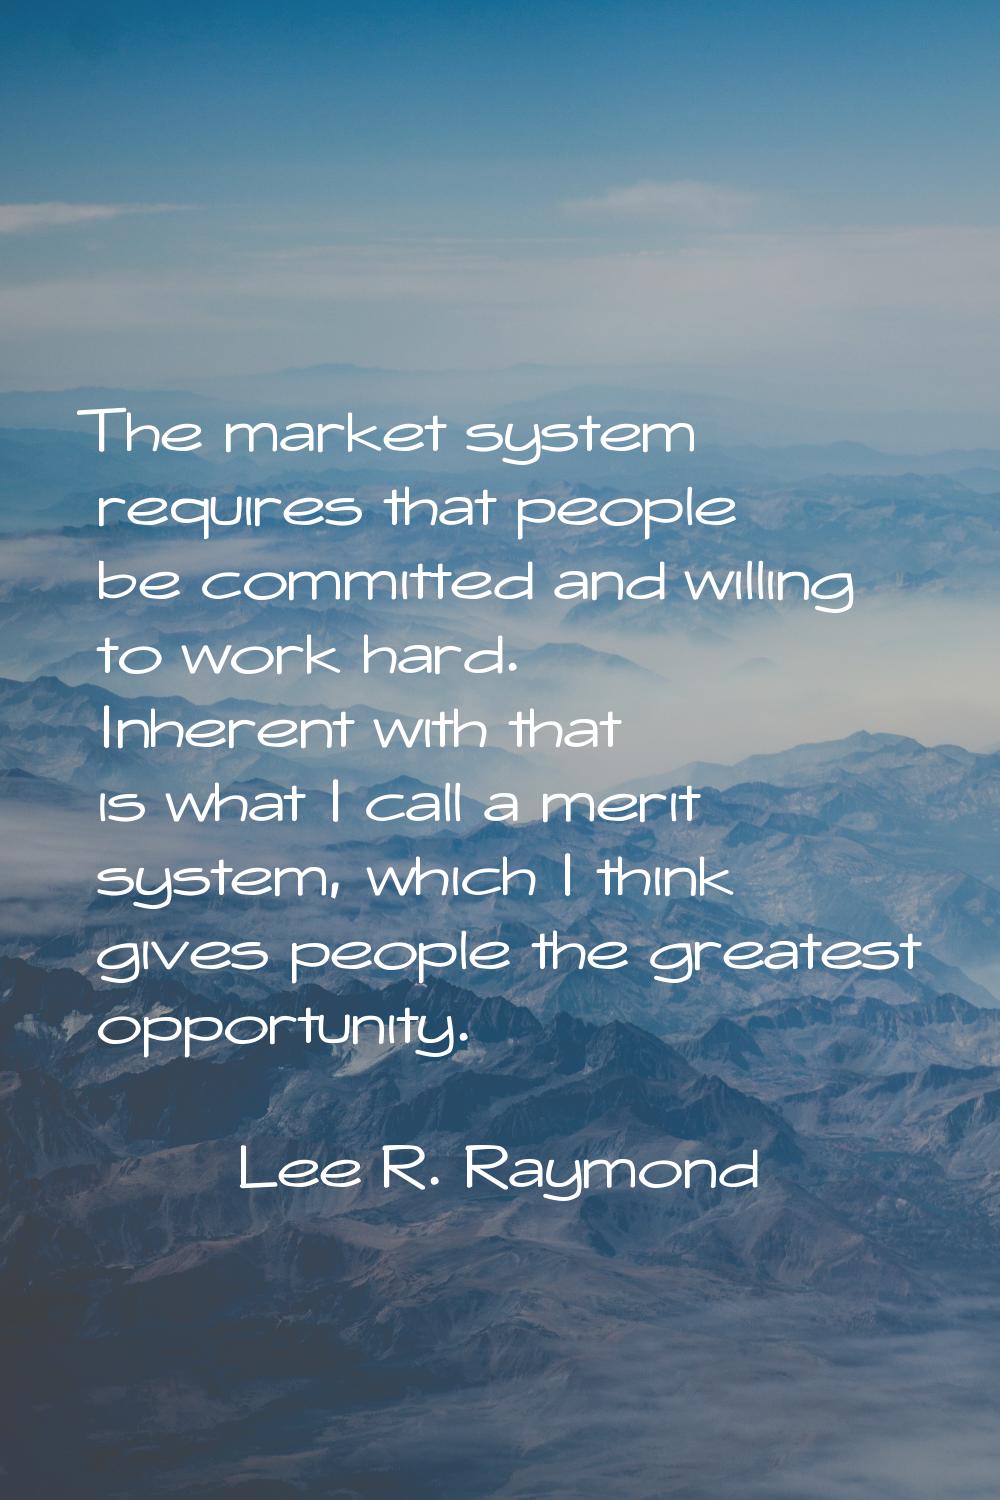 The market system requires that people be committed and willing to work hard. Inherent with that is